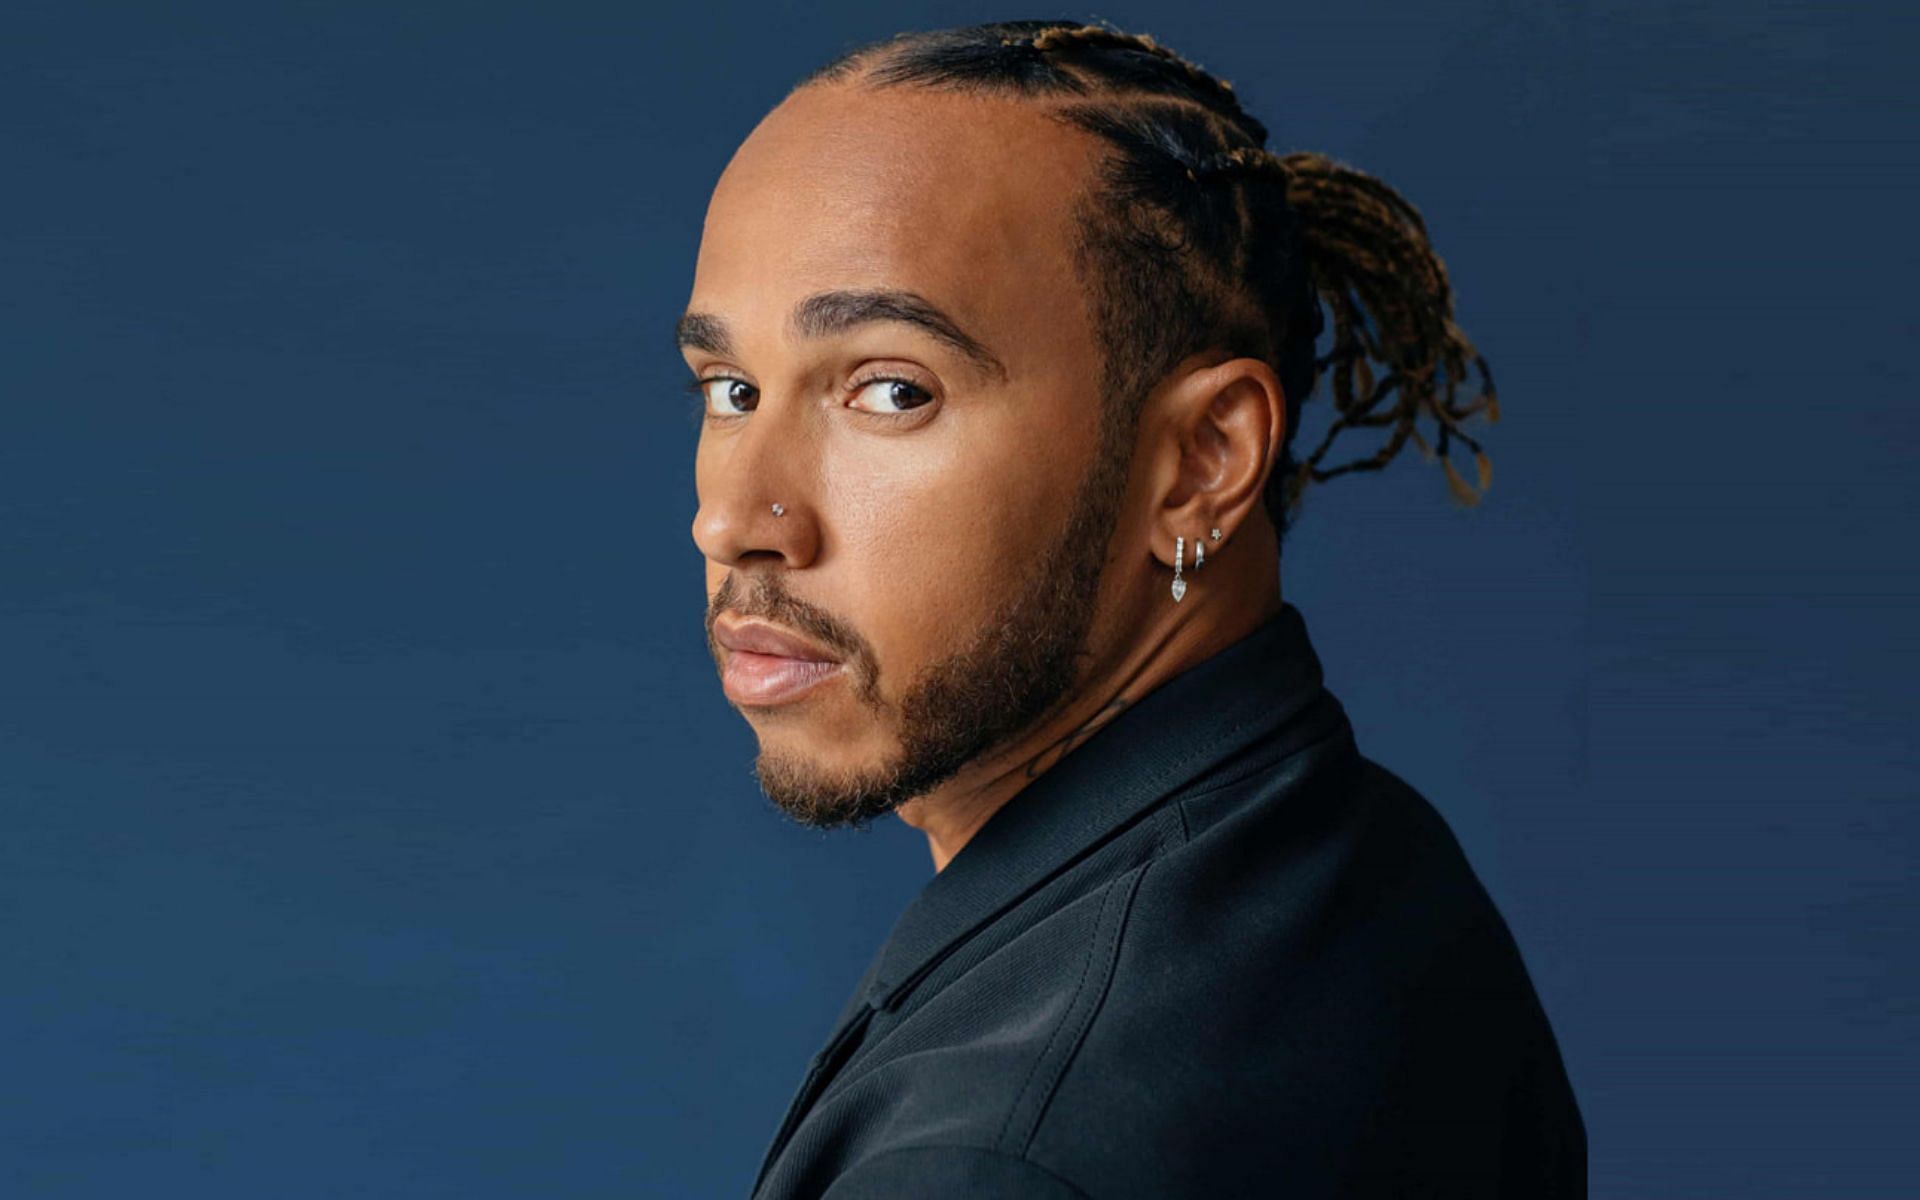 Lewis Hamilton is set to produce a feature-length documentary about his own F1 career (Image credits: Apple)